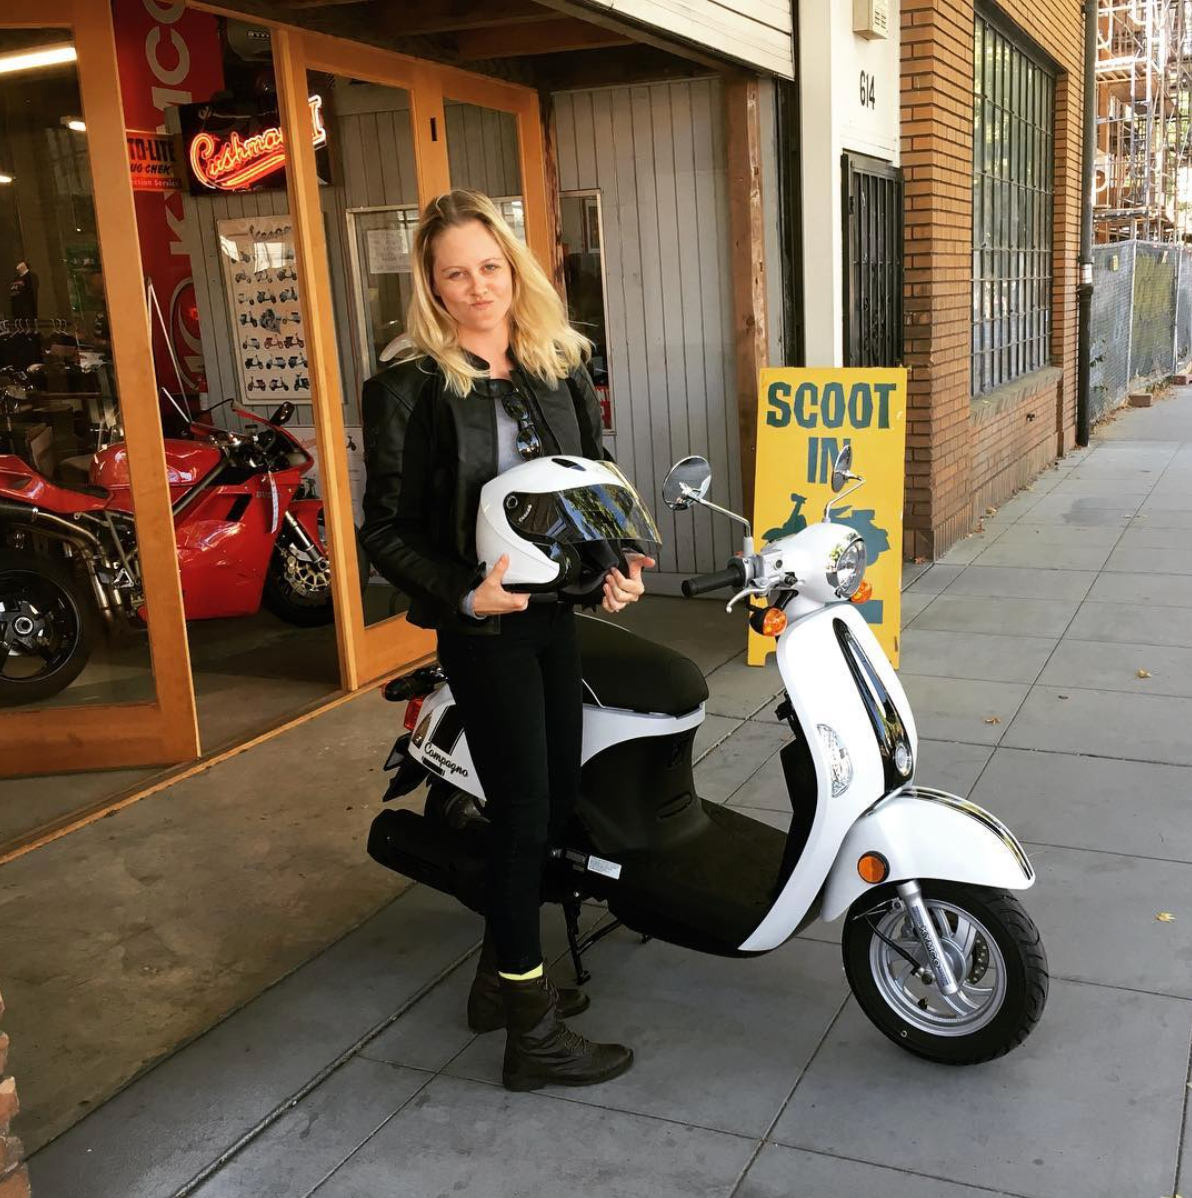 Why riding scooter helps ease my anxiety | by Buck | Medium